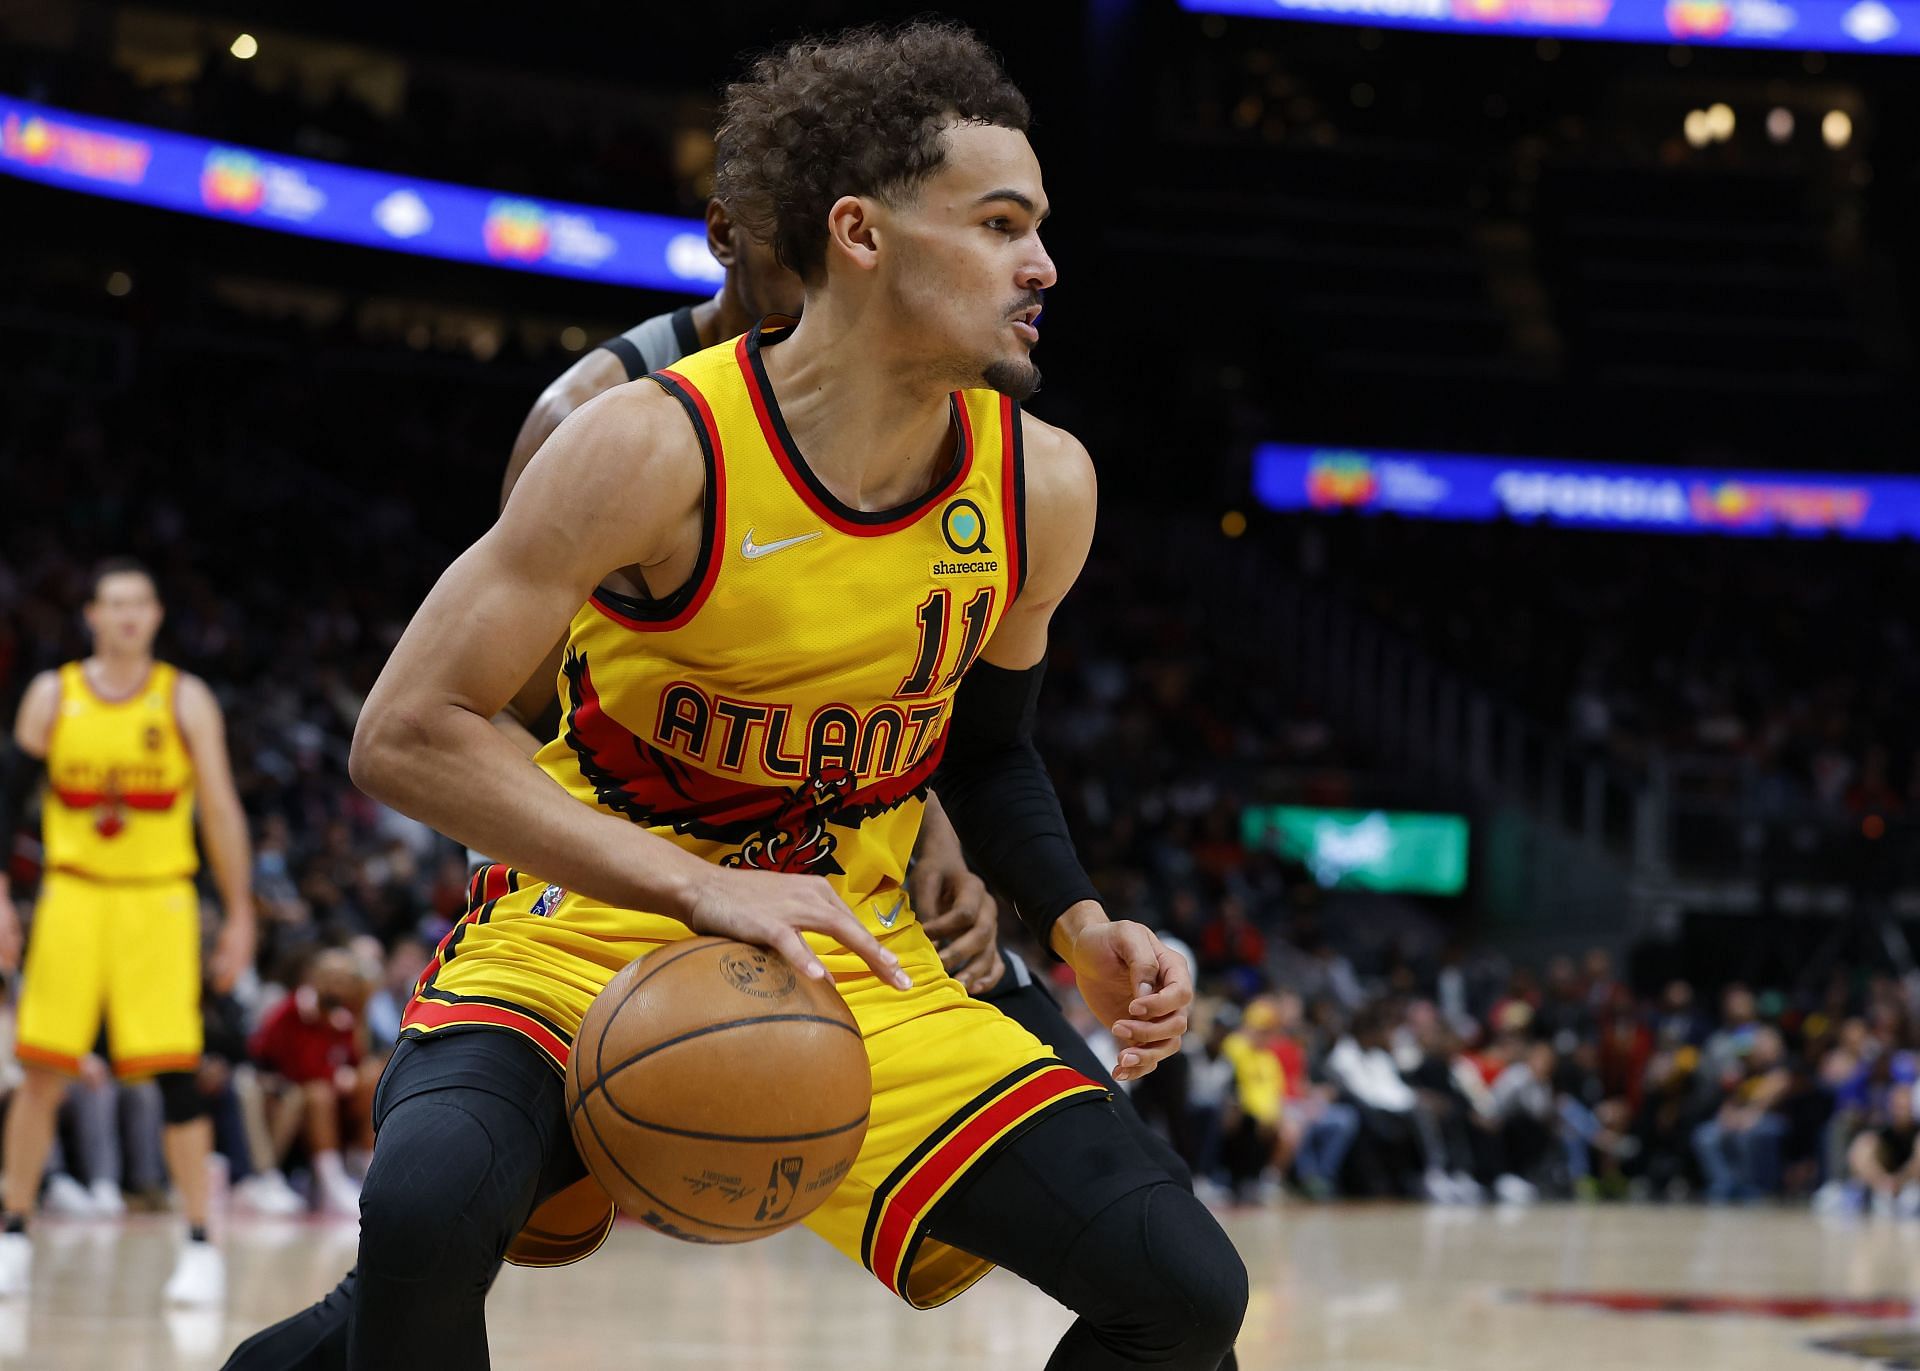 Enter caption Trae Young #11 of the Atlanta Hawks in a game vs. the Brooklyn Nets at State Farm Arena in Atlanta, Georgia.